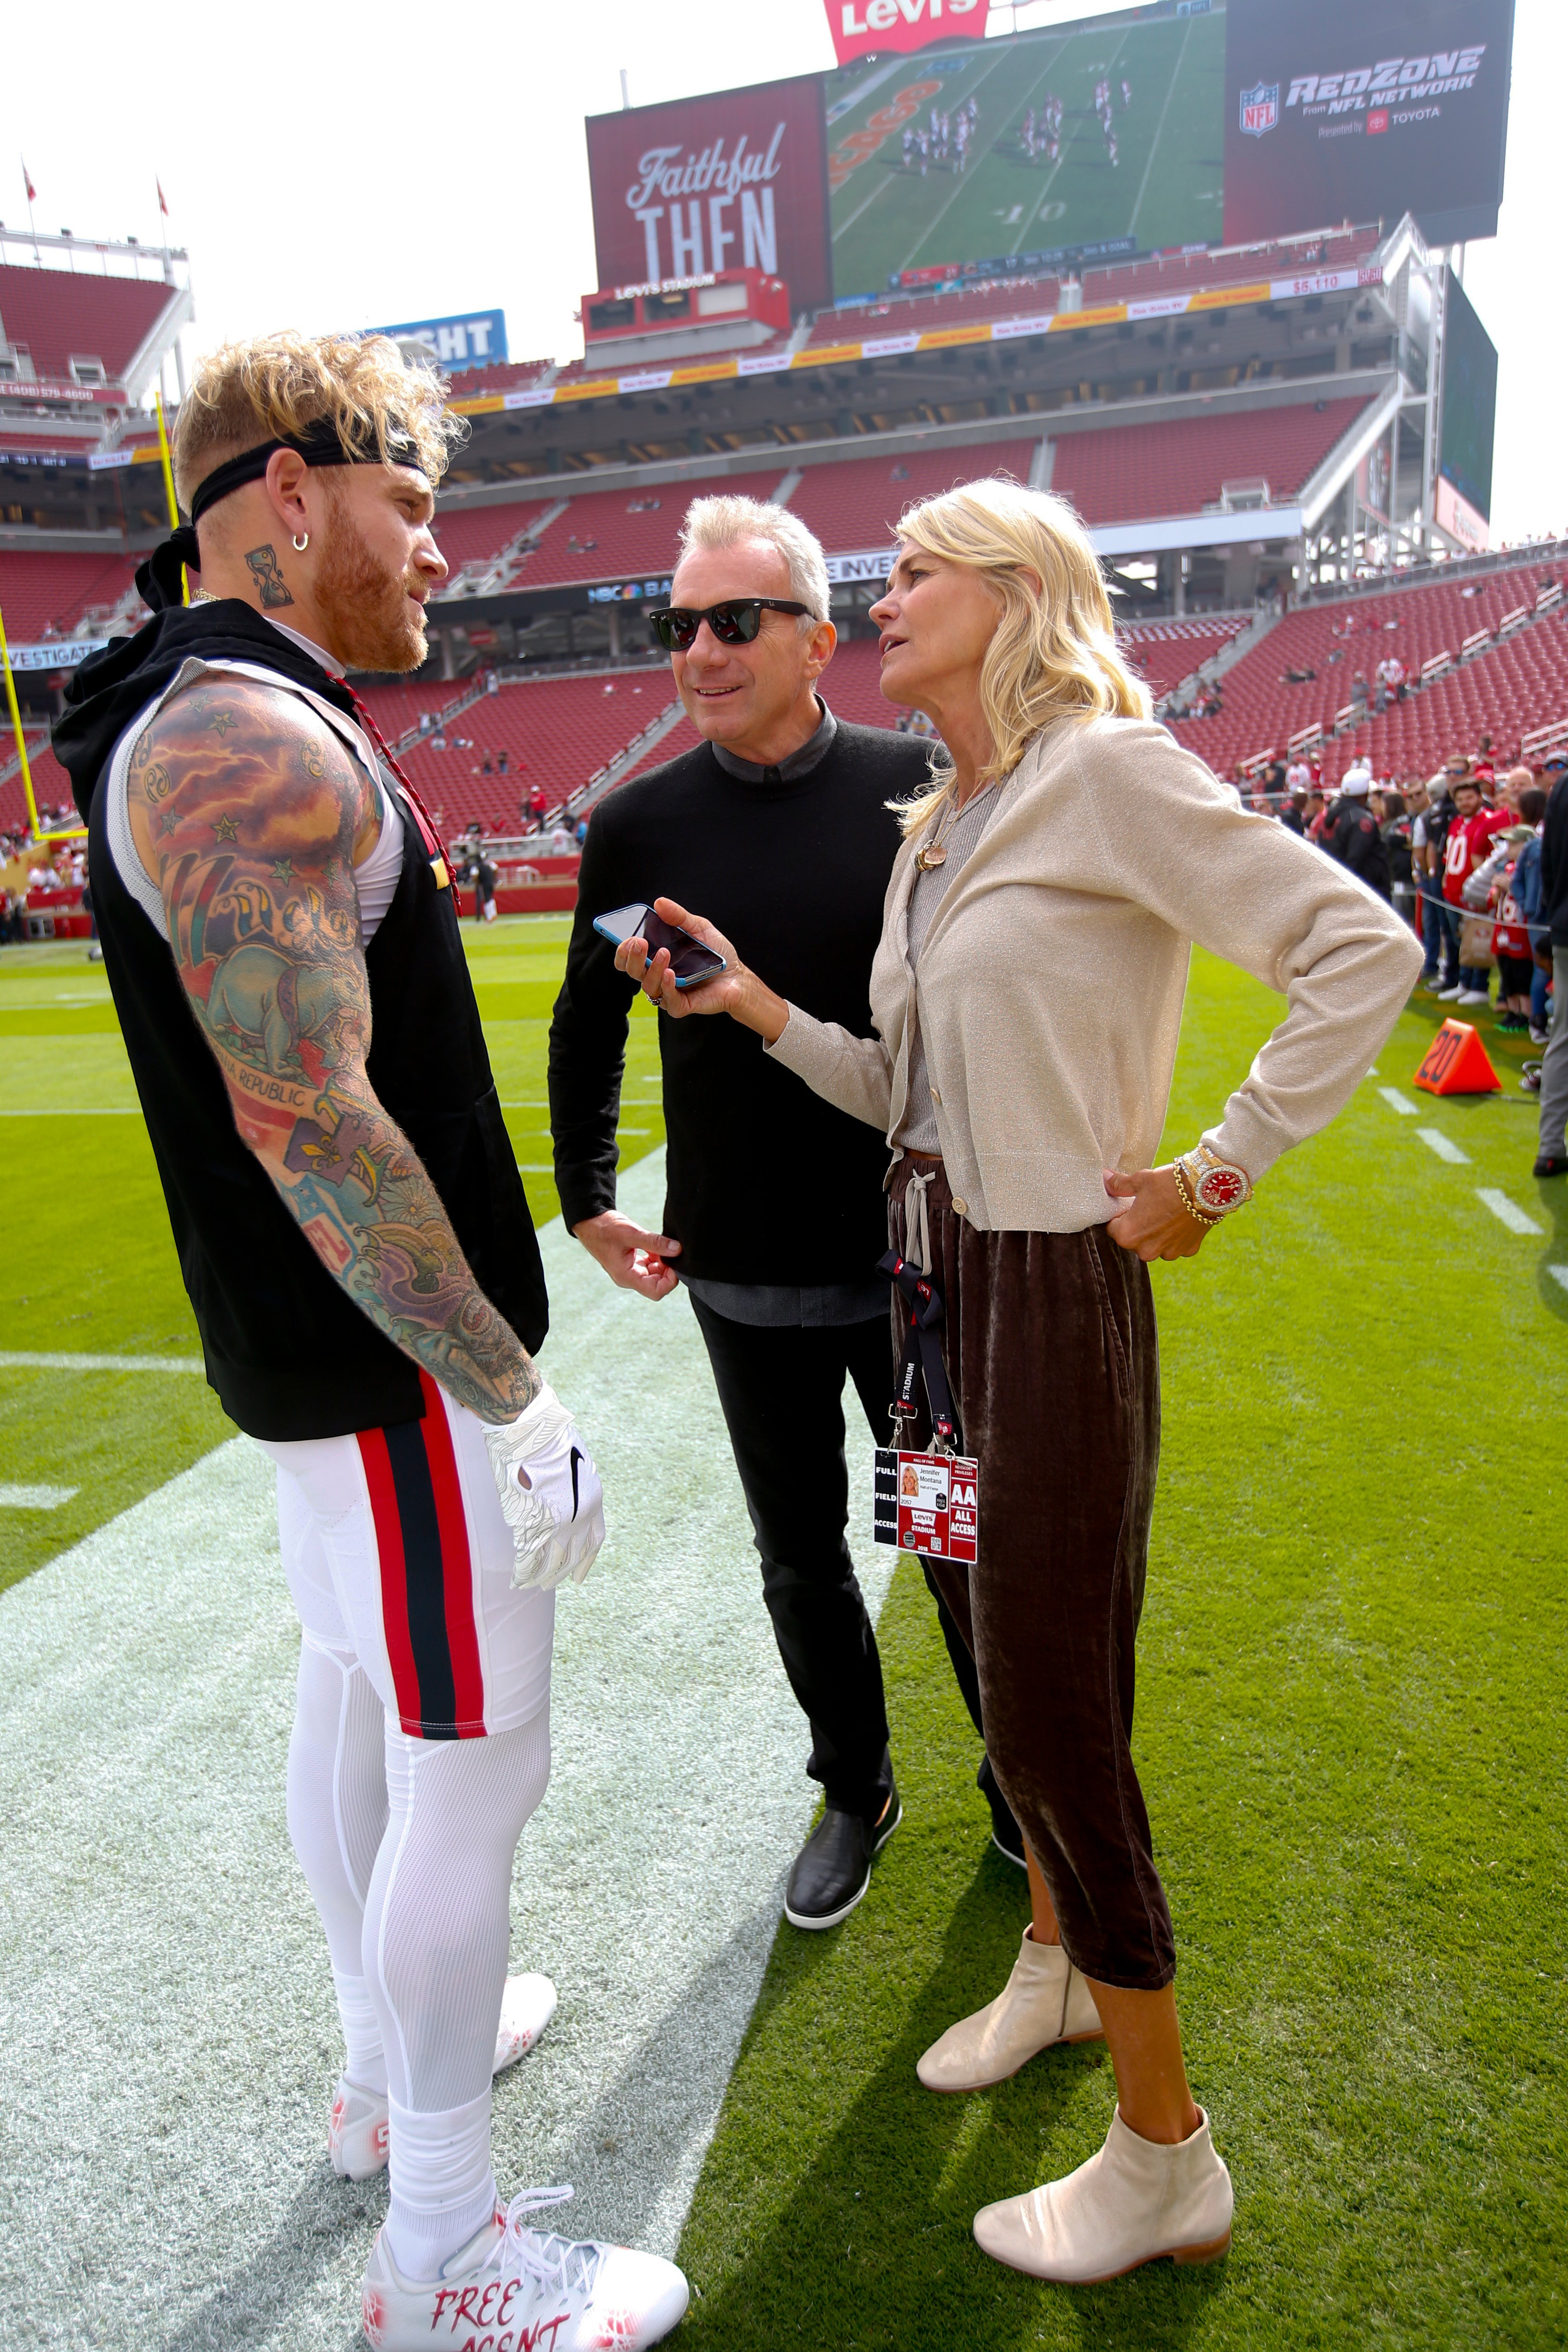 Cassius Marsh #54 of the San Francisco 49ers talking with Joe Montana and his wife Jennifer Montana before game against the Los Angeles Rams at Levi's Stadium in Santa Clara | Source: Getty Images